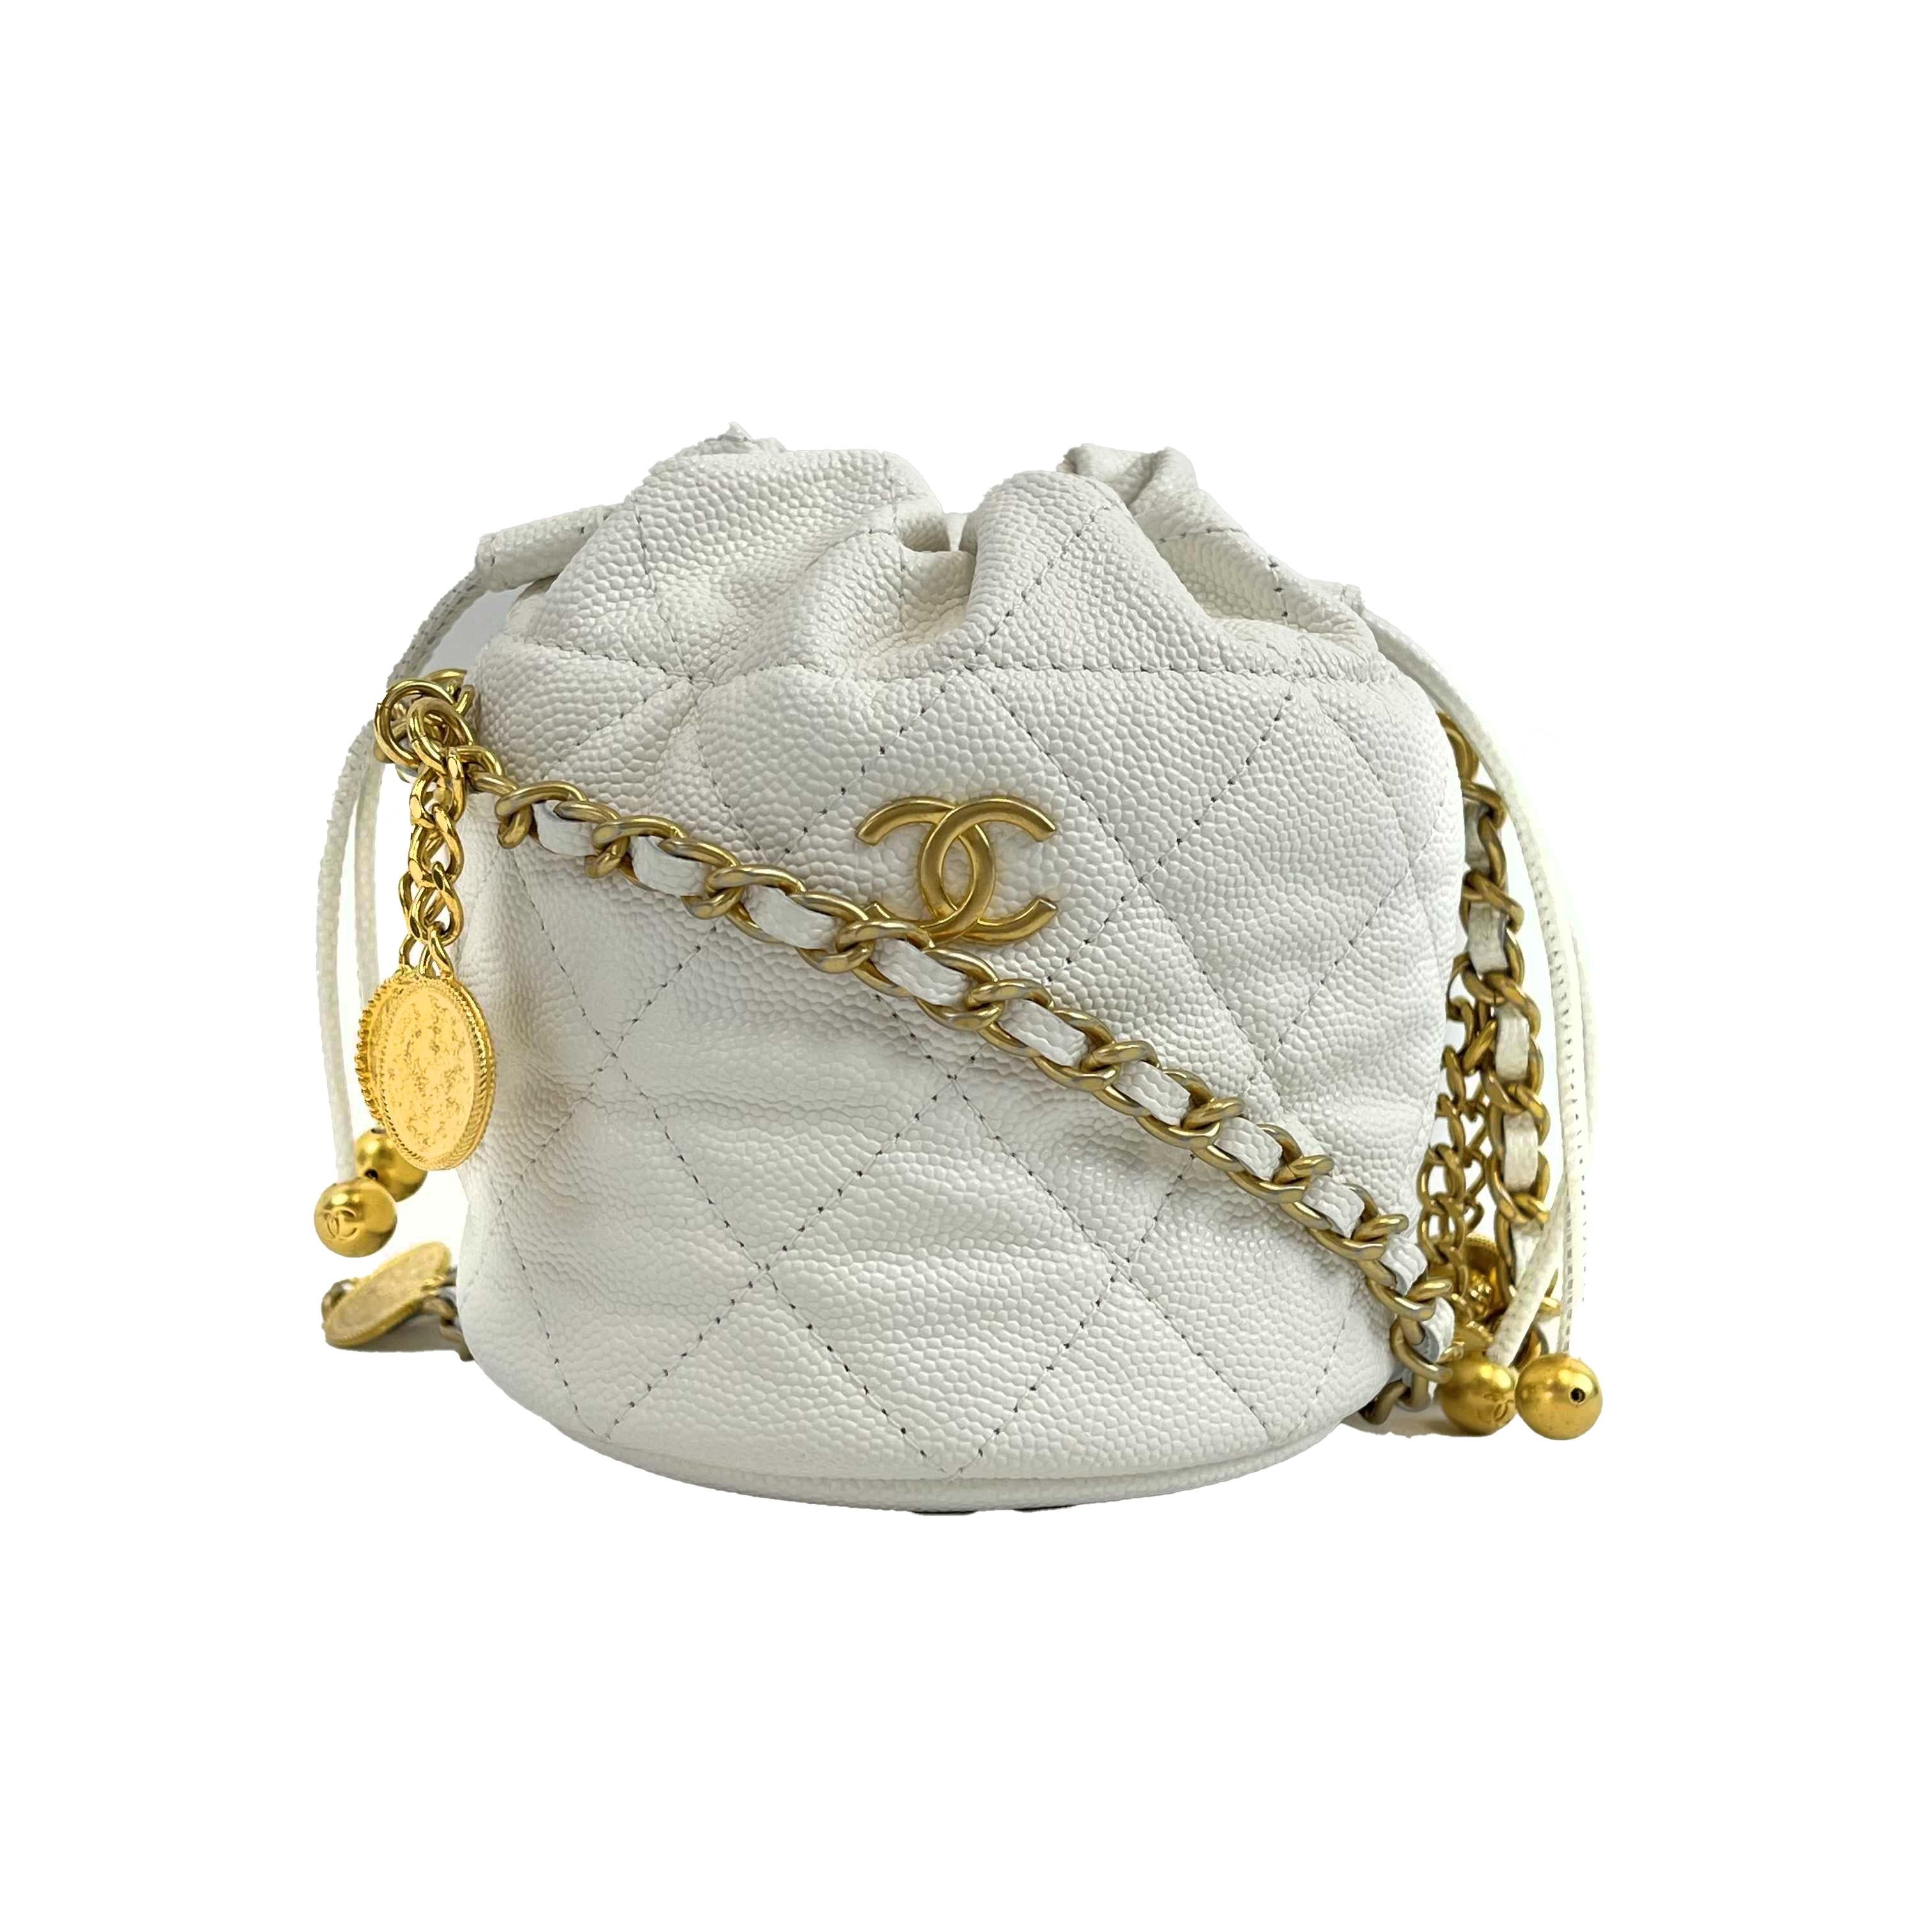 CHANEL - NEW Mini Bucket Bag - White Caviar Leather / Gold 10 Coins CC Crossbody For Sale 5